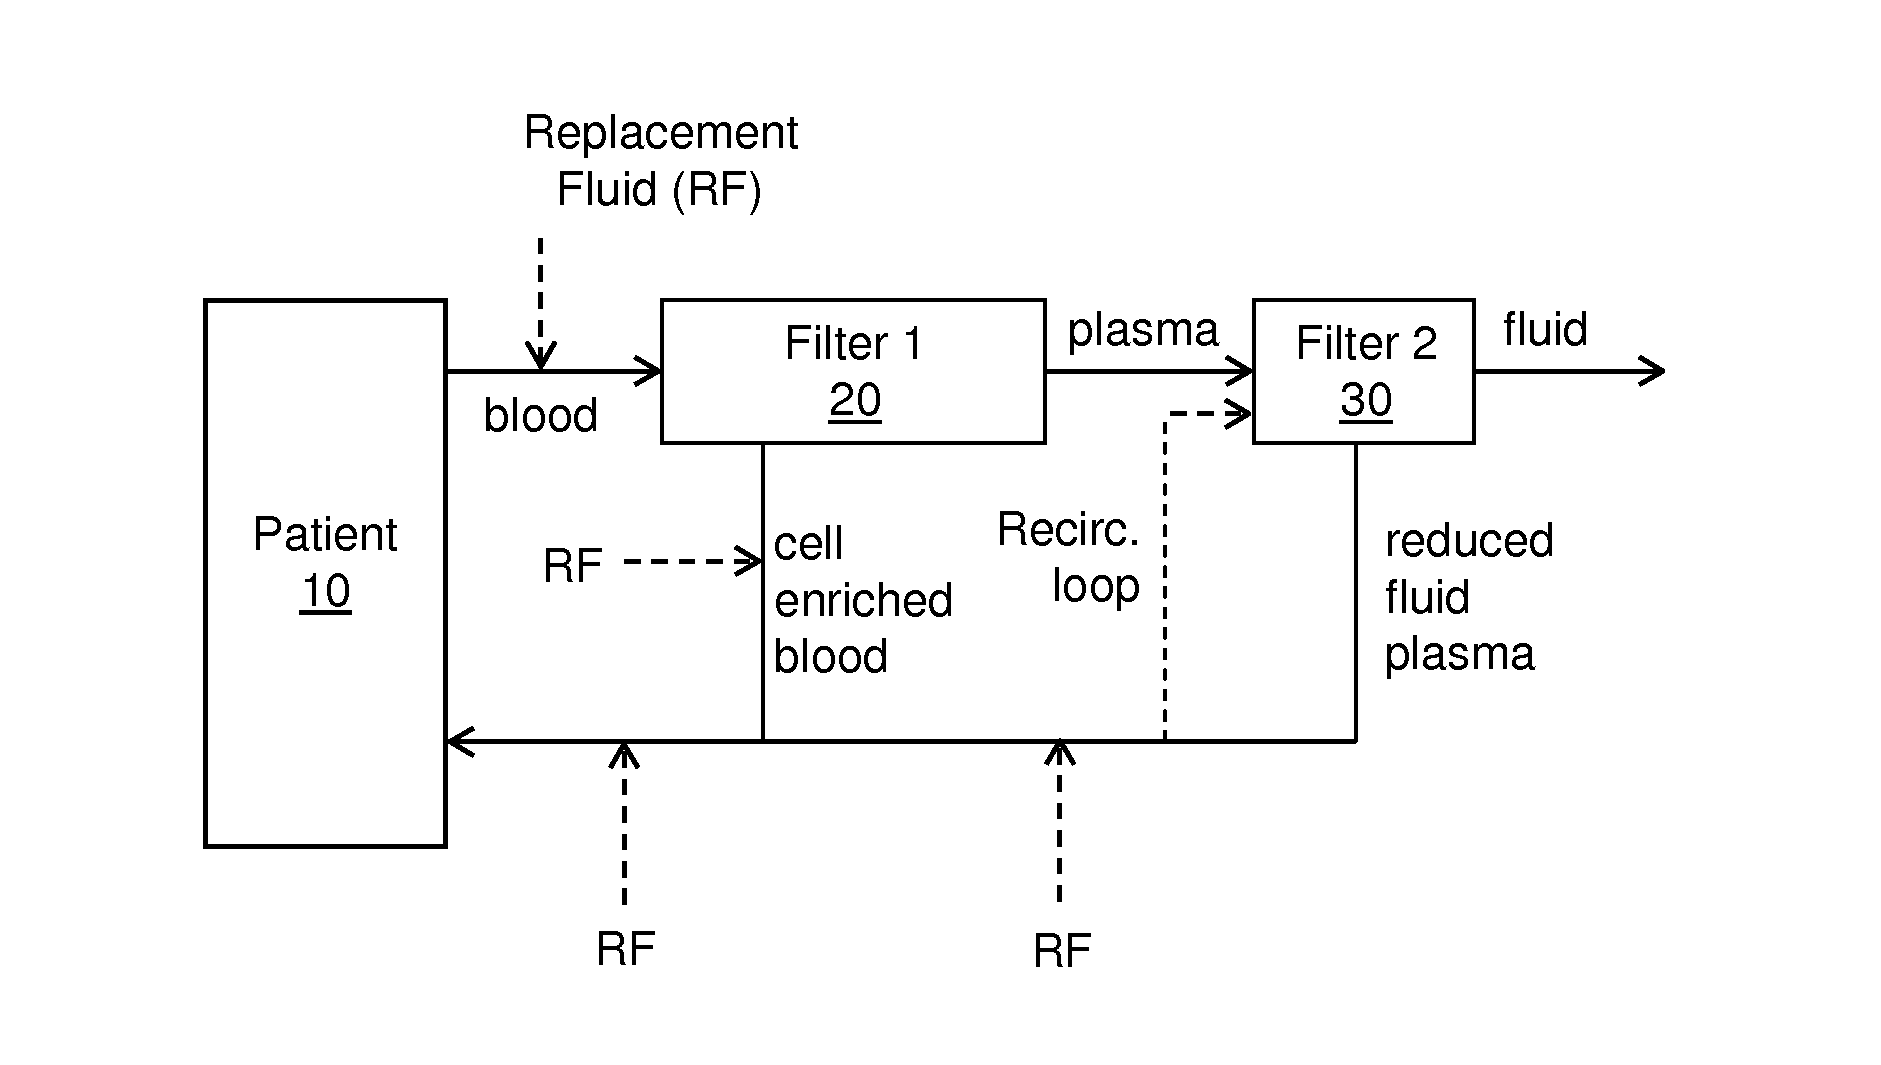 Multi-staged filtration system for blood fluid removal